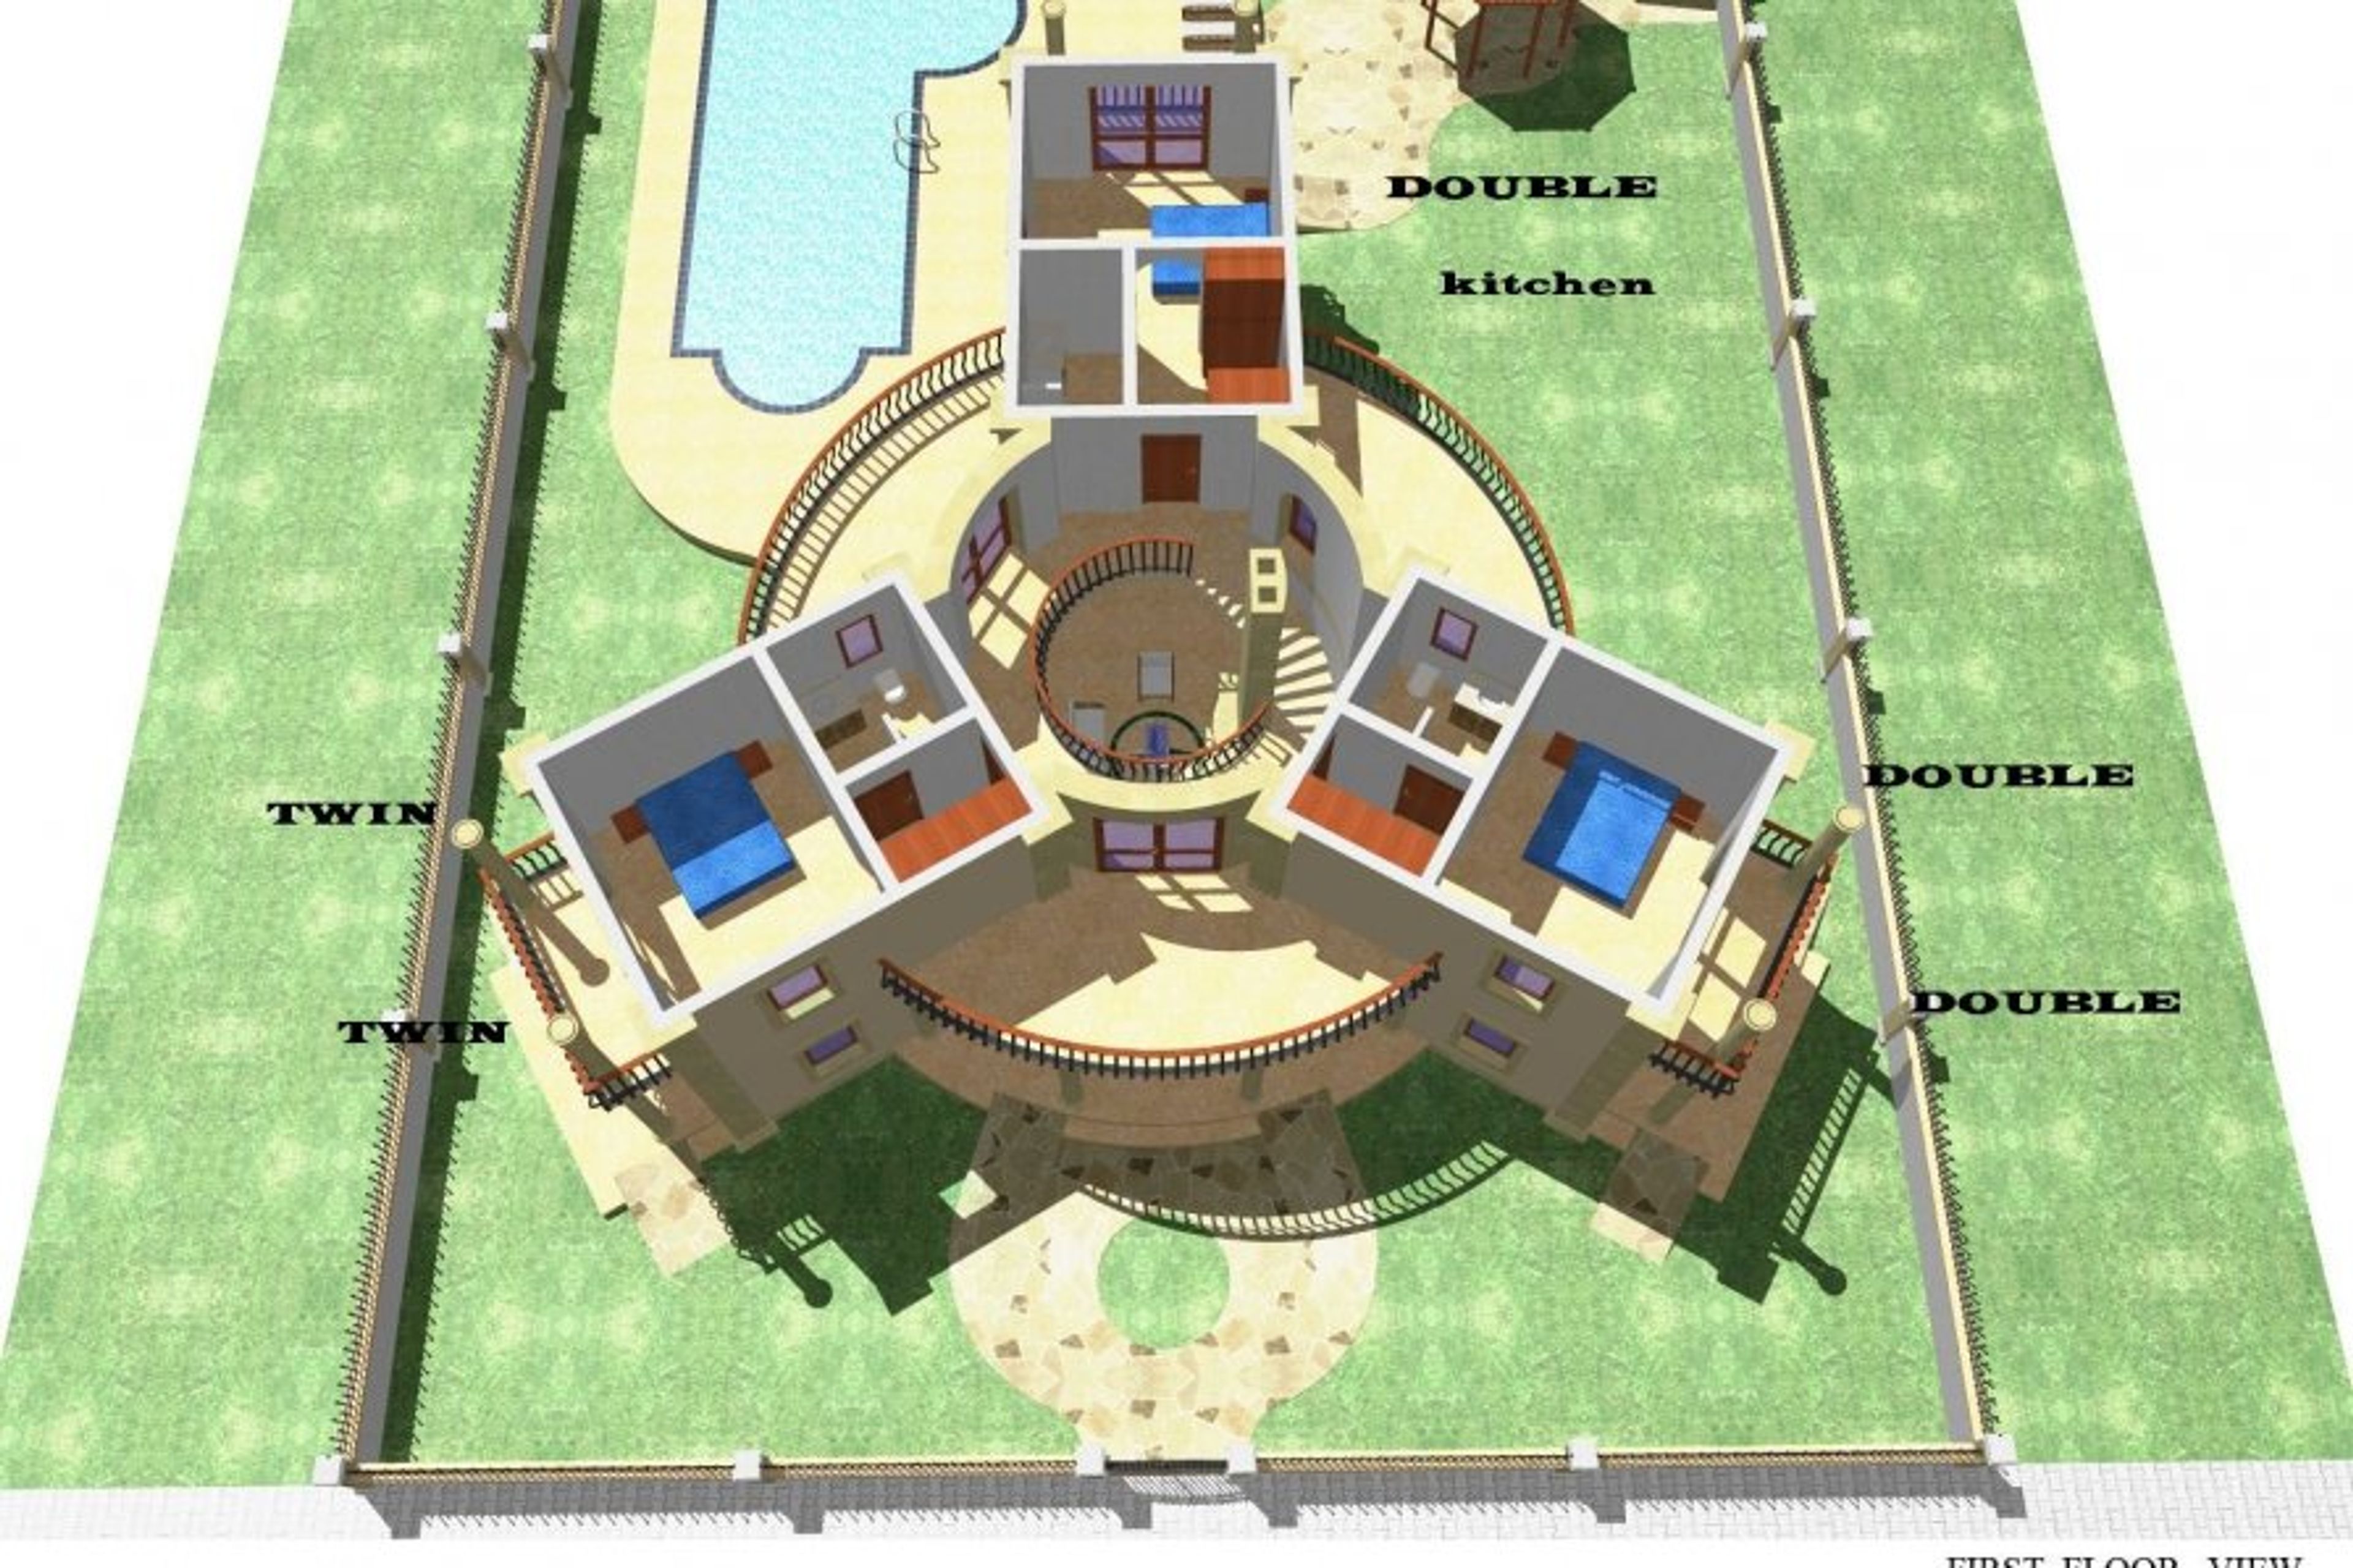 Bedroom plan .
Balcony's for all to enjoy sunshine or shade .